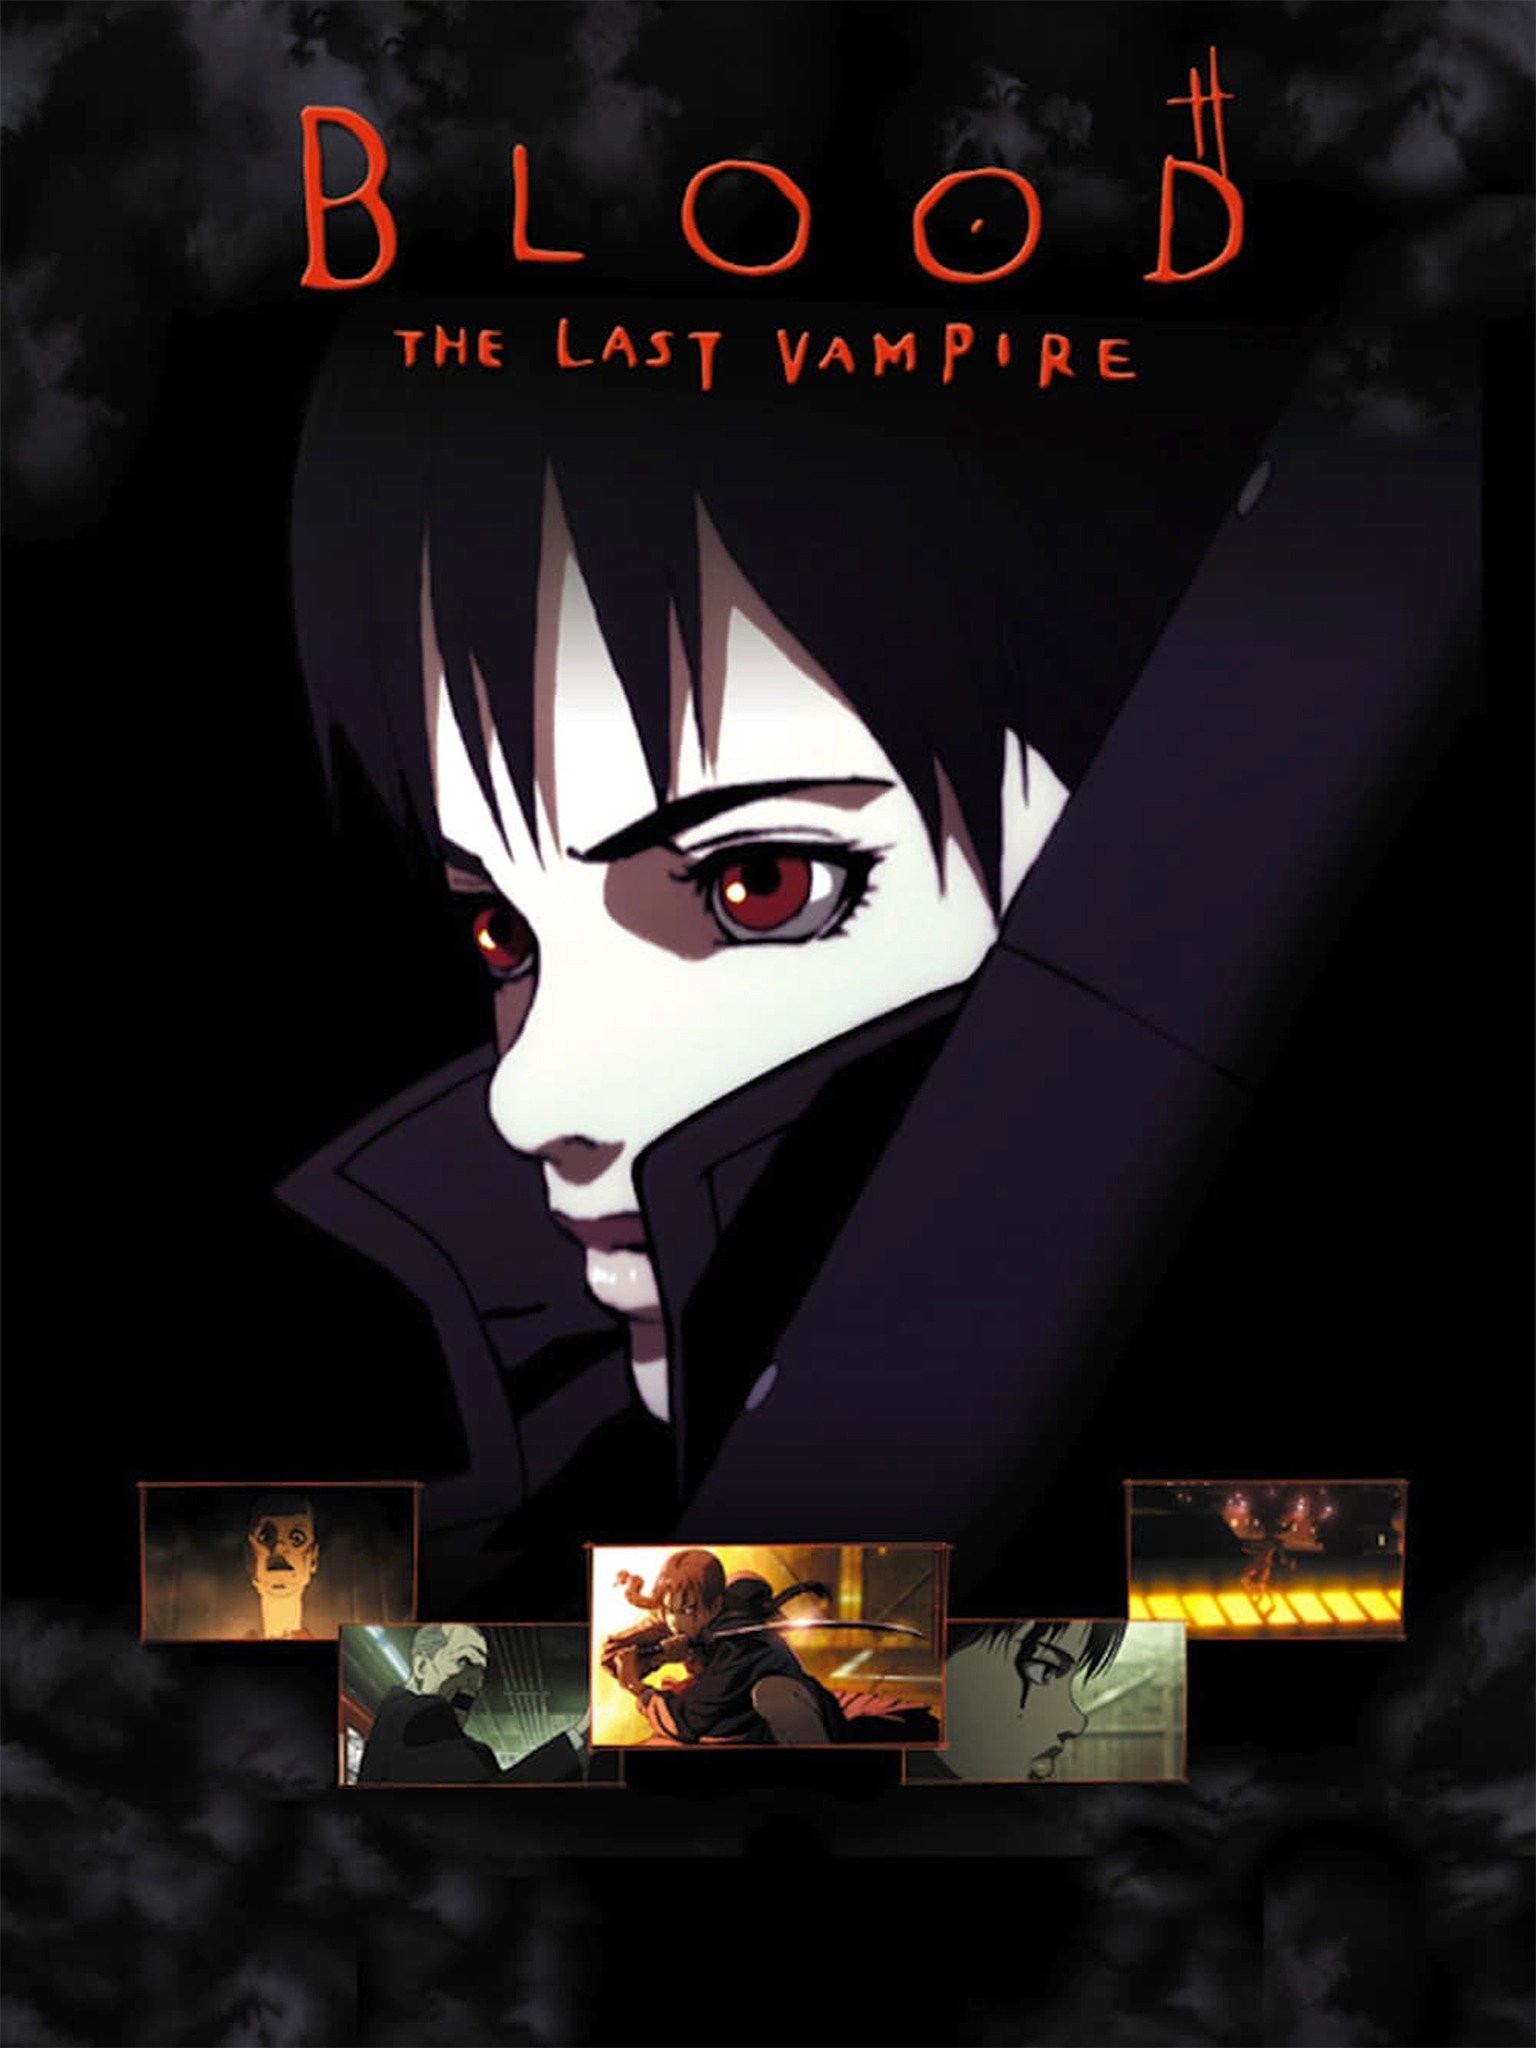 Call Of The Night Is A New Vampire Anime Coming This July - Check Out The  Trailer